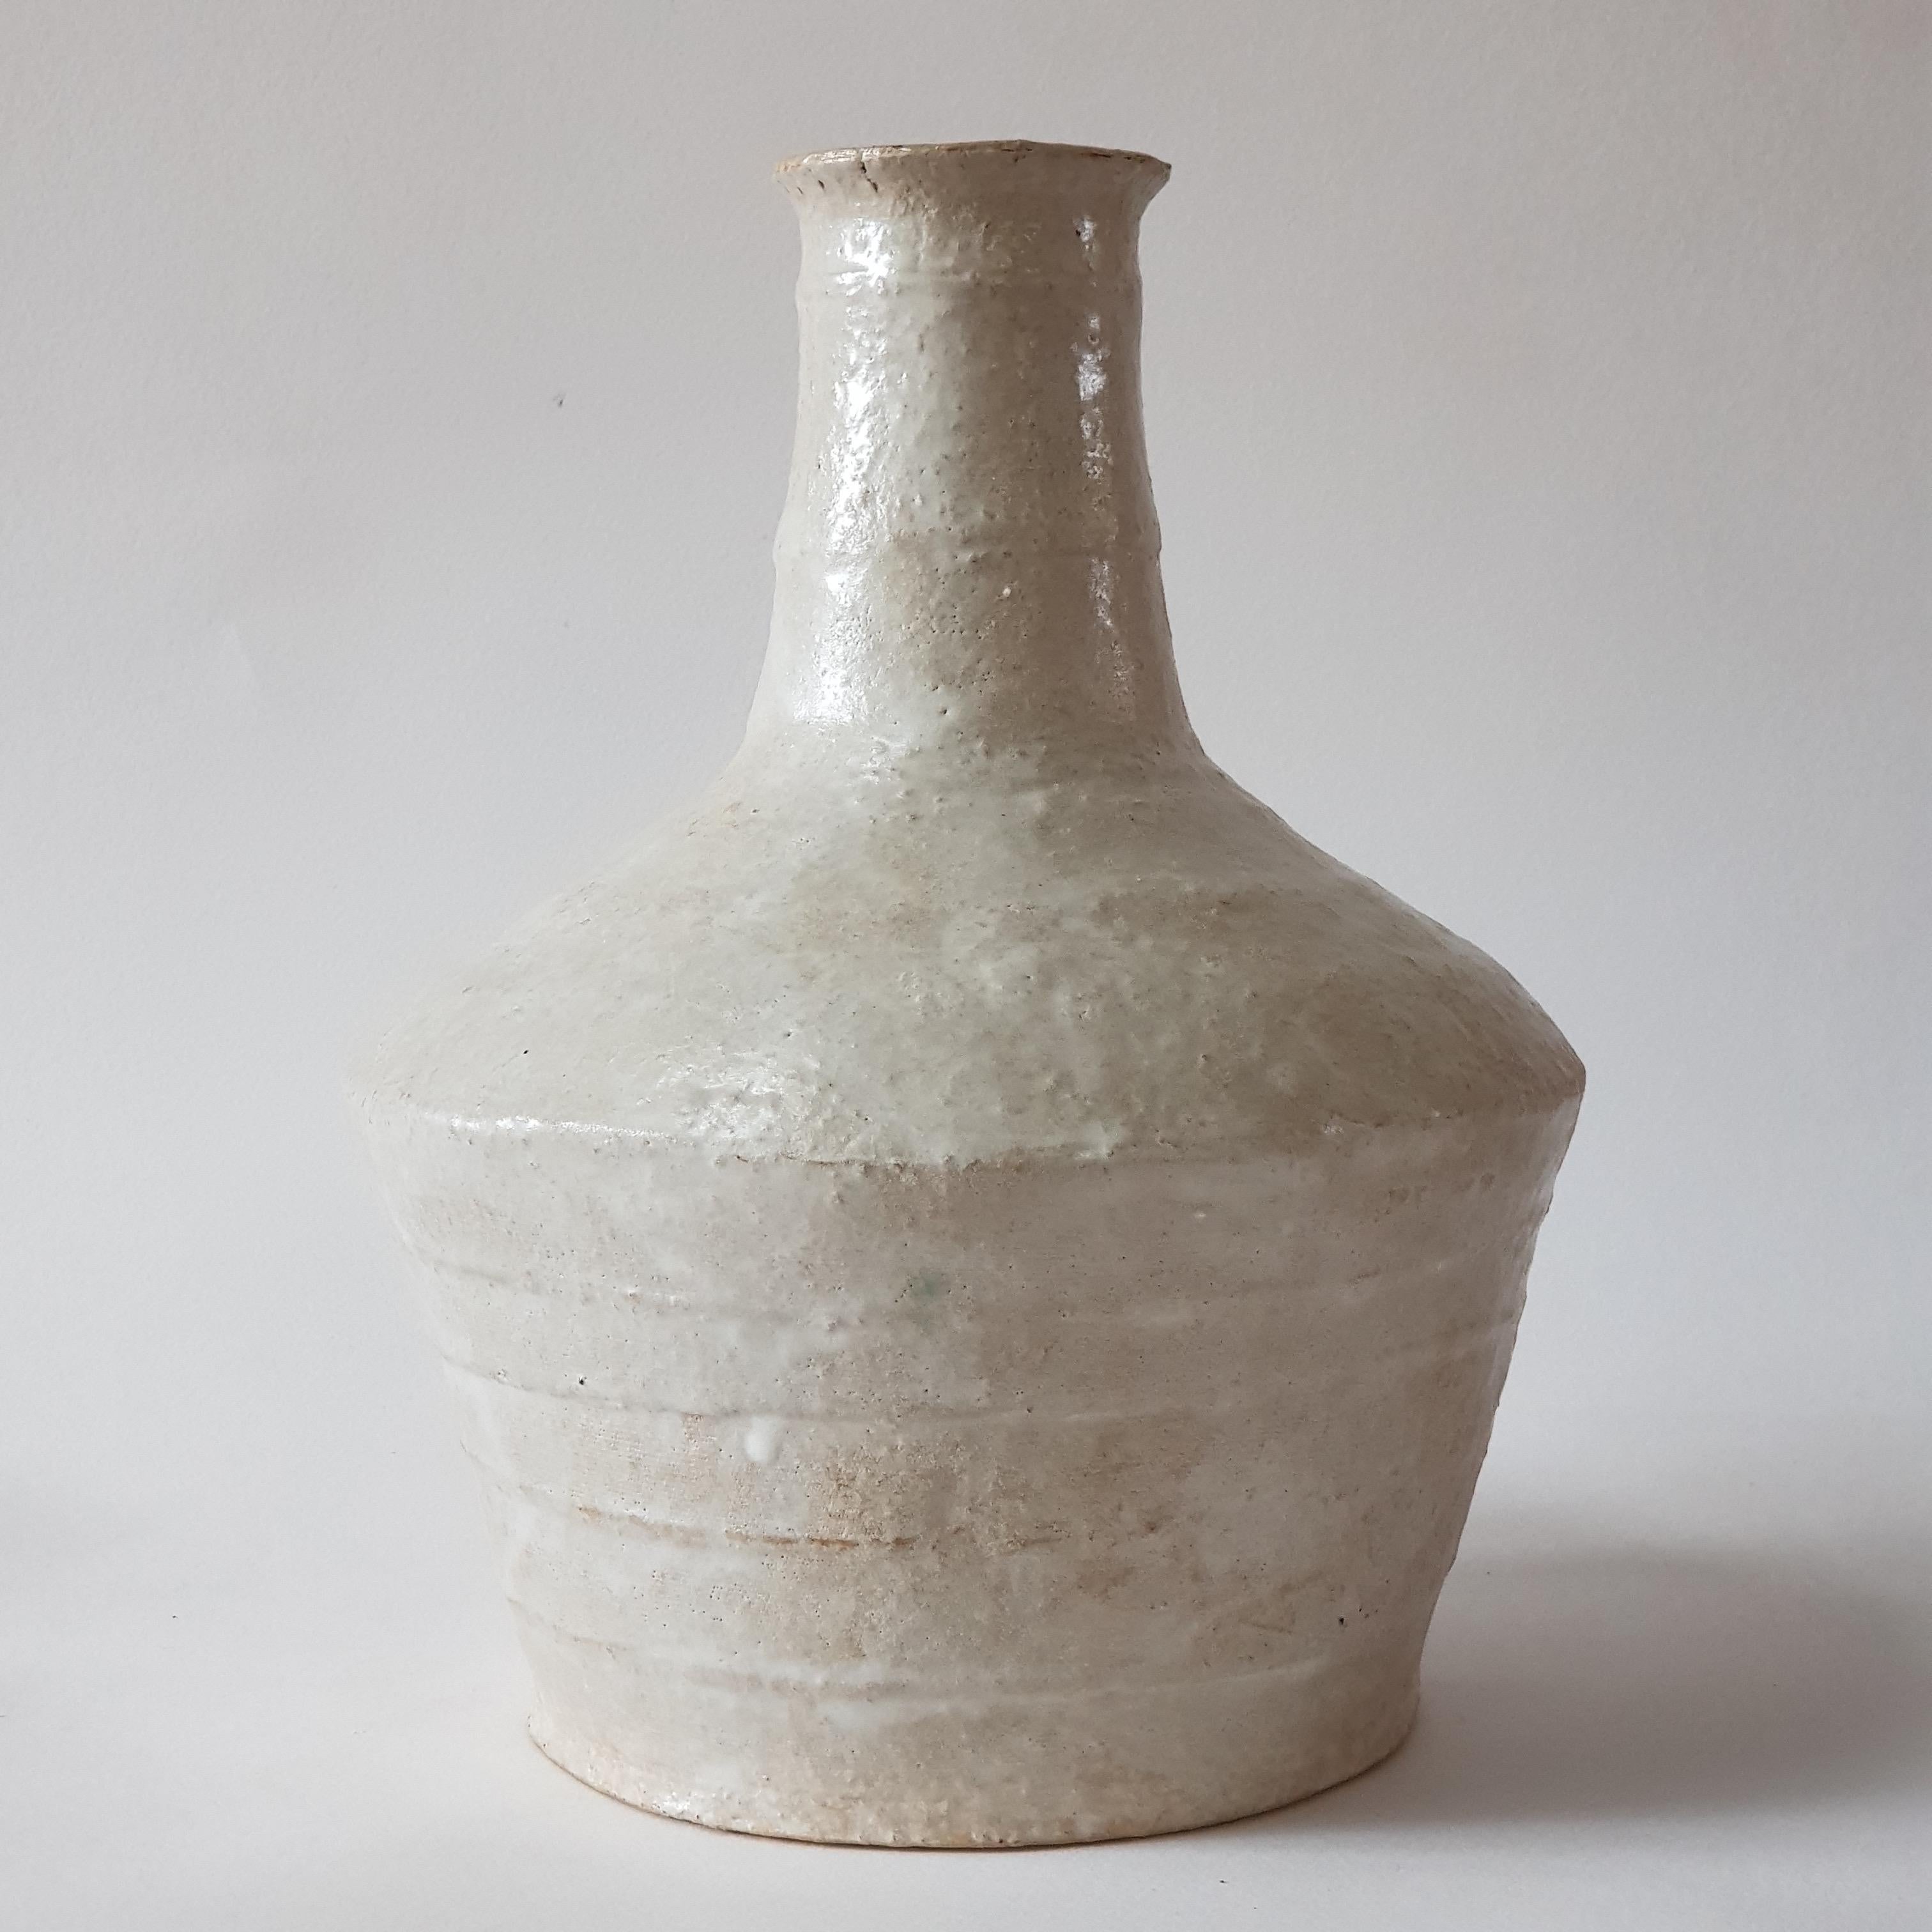 Beige Stoneware Lagynos Vase by Elena Vasilantonaki
Unique
Dimensions: ⌀ 19 x H 23 cm (Dimensions may vary)
Materials: Stoneware
Available finishes: Black, Beige, Brown, Red, Terracotta, White Patina

Growing up in Greece I was surrounded by pottery